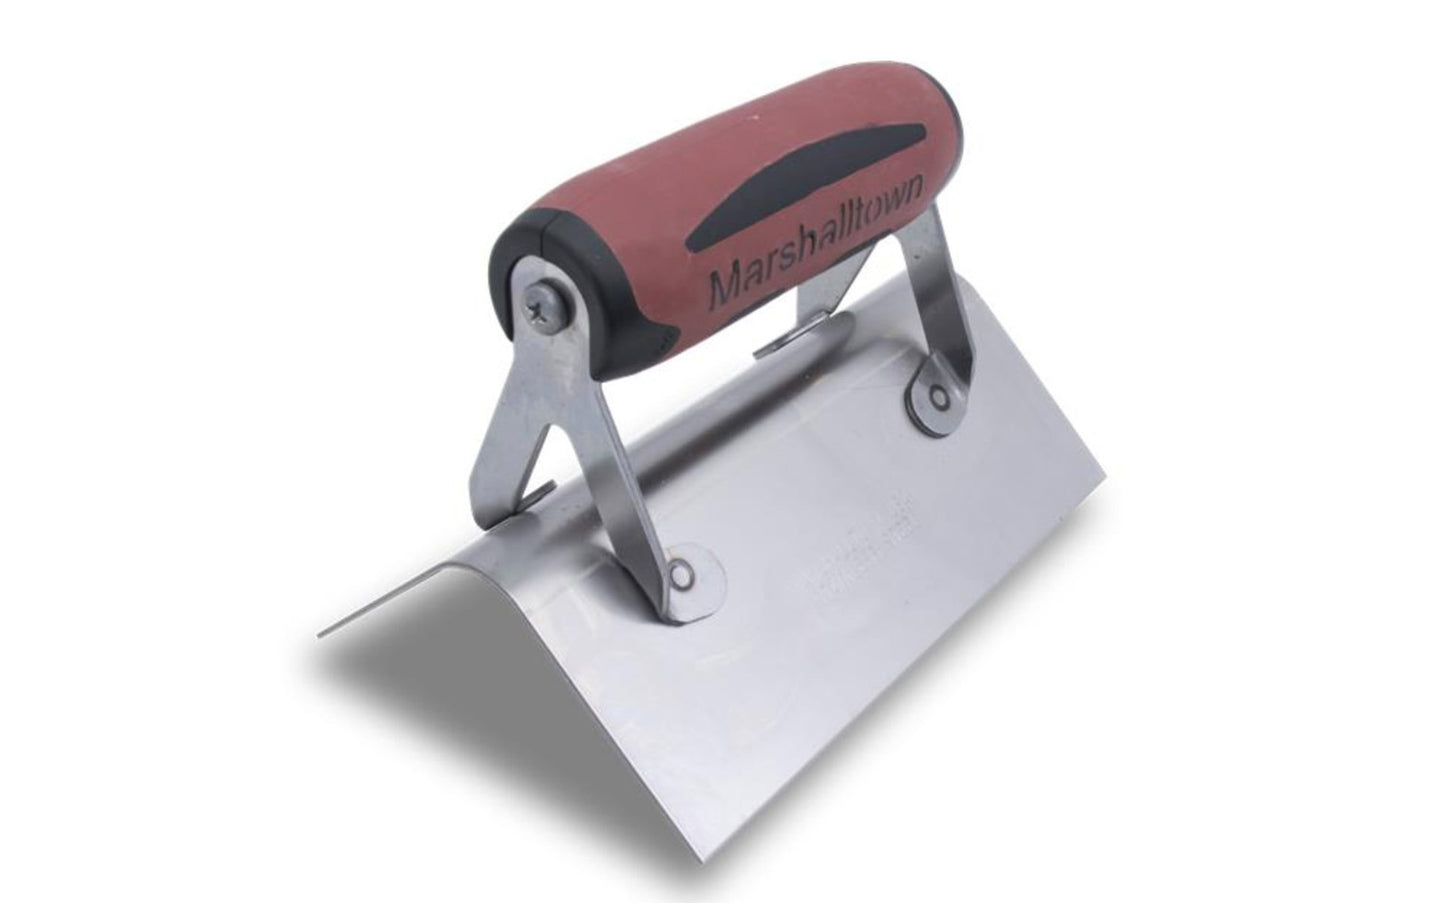 Marshalltown 6" x 2-1/2" Stainless Outside Corner Trowel - Radius Corner Style. Ideal for creating corners & edges on concrete steps or anywhere where square and rounded corners are needed. The stainless steel blade is durable, easy to clean, and is fitted with a comfortable soft grip "DuraSoft" handle that reduces fatigue when using this tool. Model 68SSD ~ 035965041287